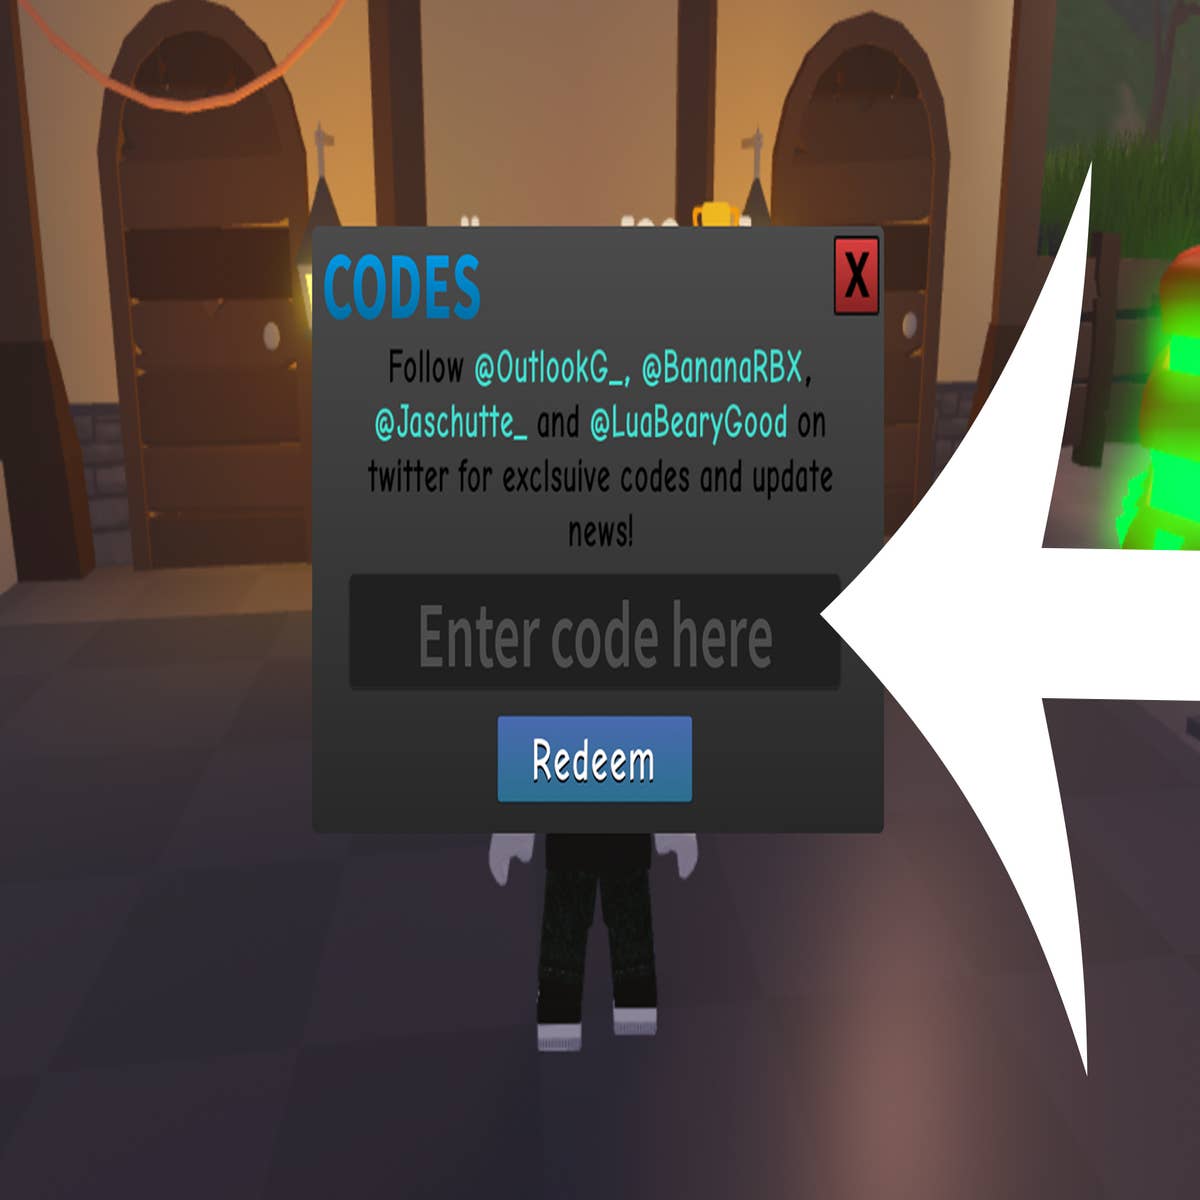 Blox Royale Codes - Try Hard Guides